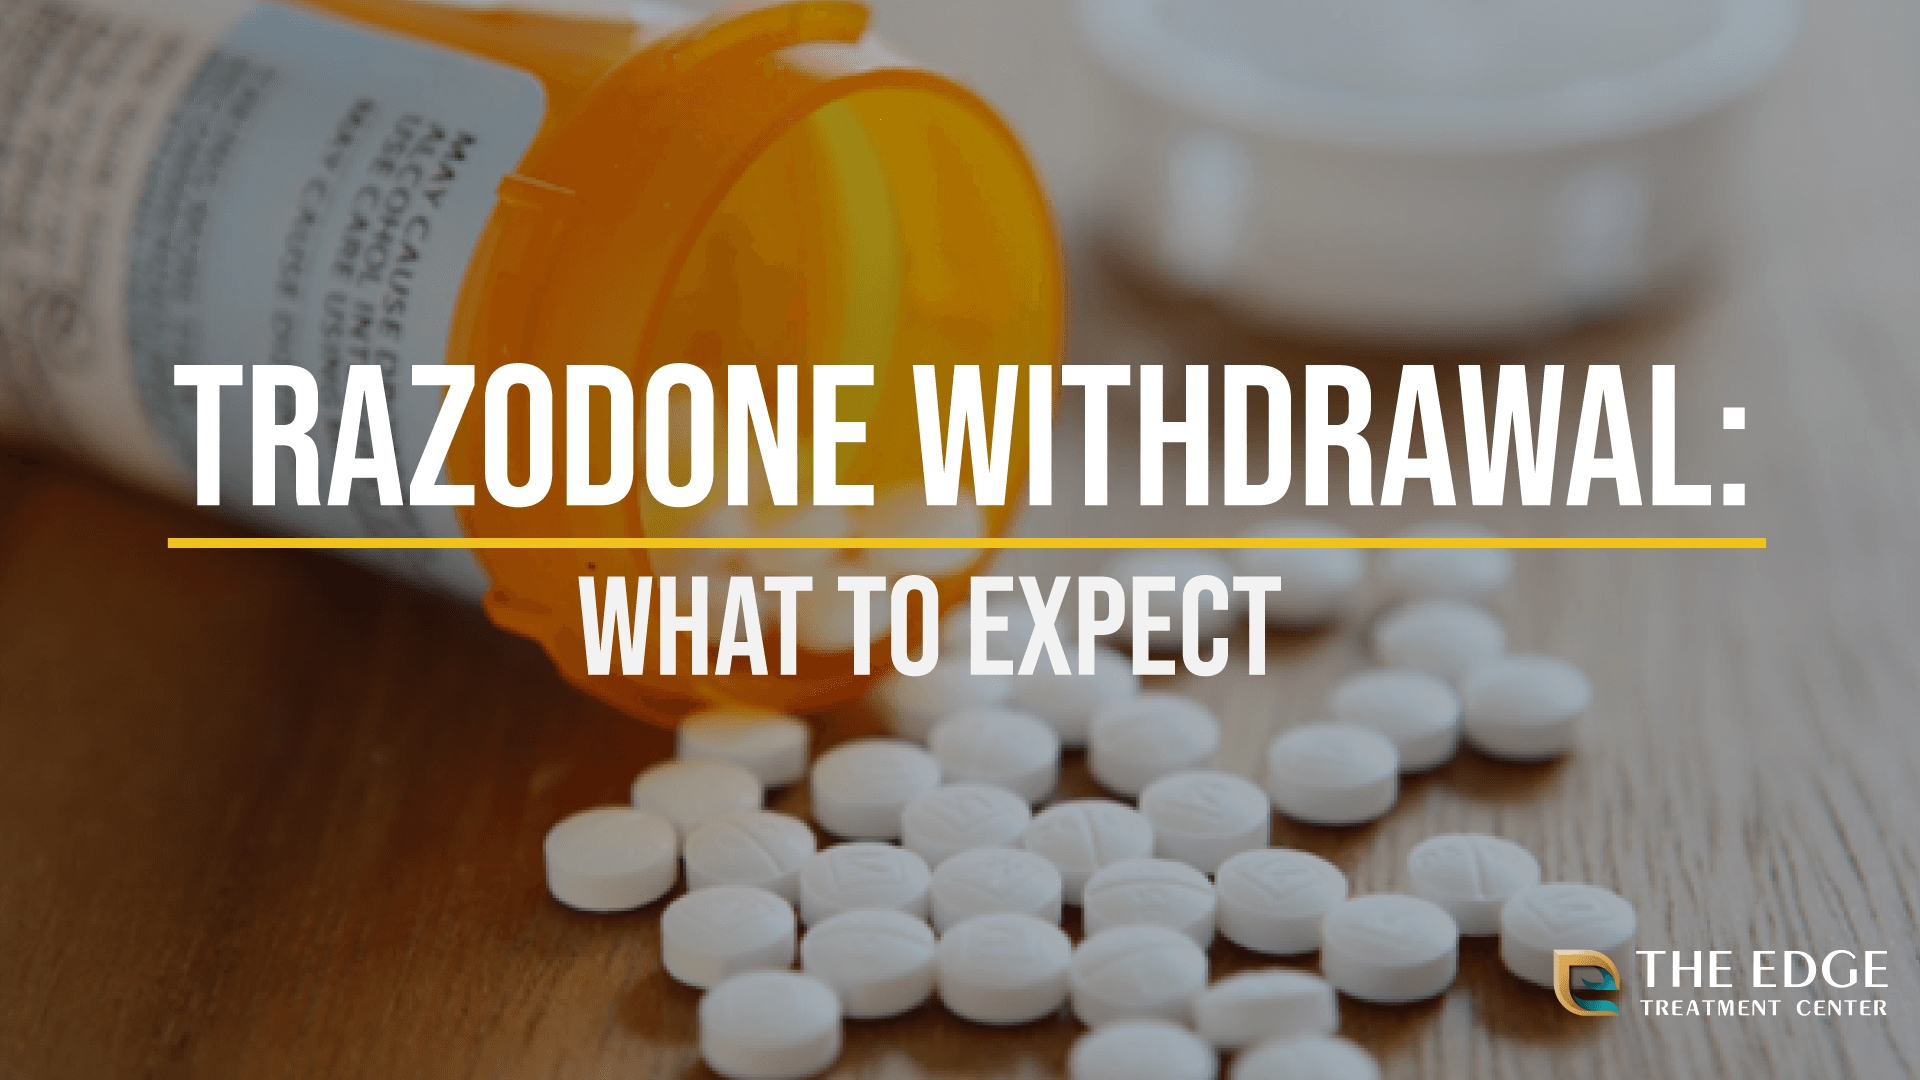 What is Trazodone Withdrawal Like? A Look at the Process